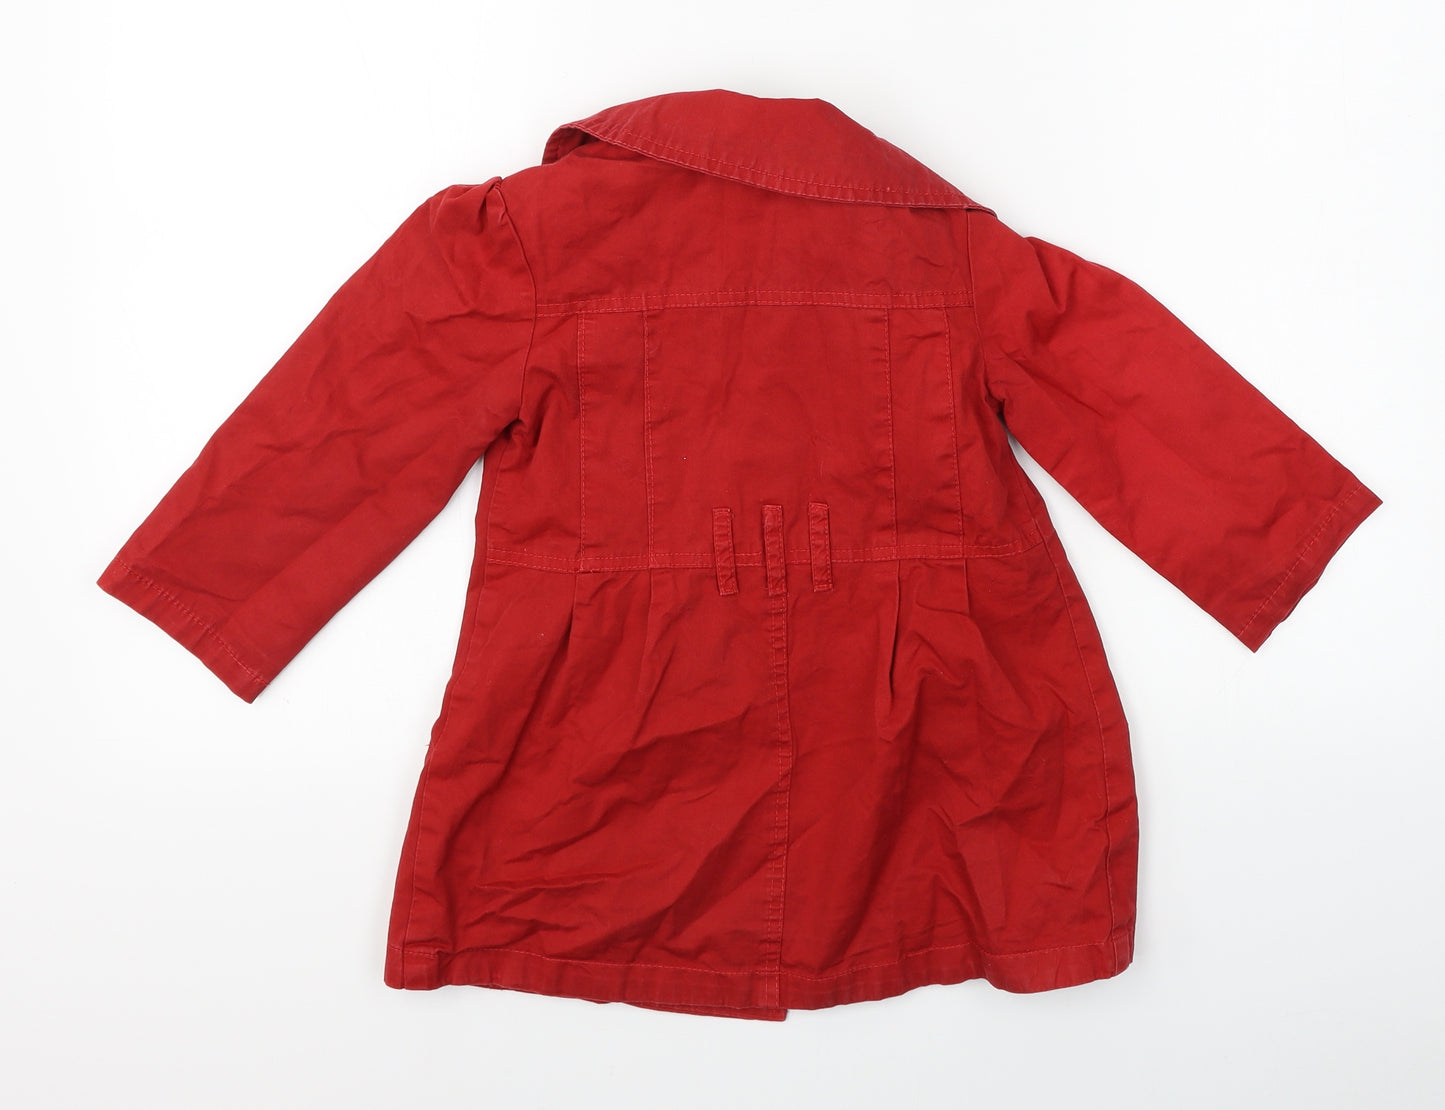 Young Dimension Girls Red   Rain Coat Coat Size 2-3 Years